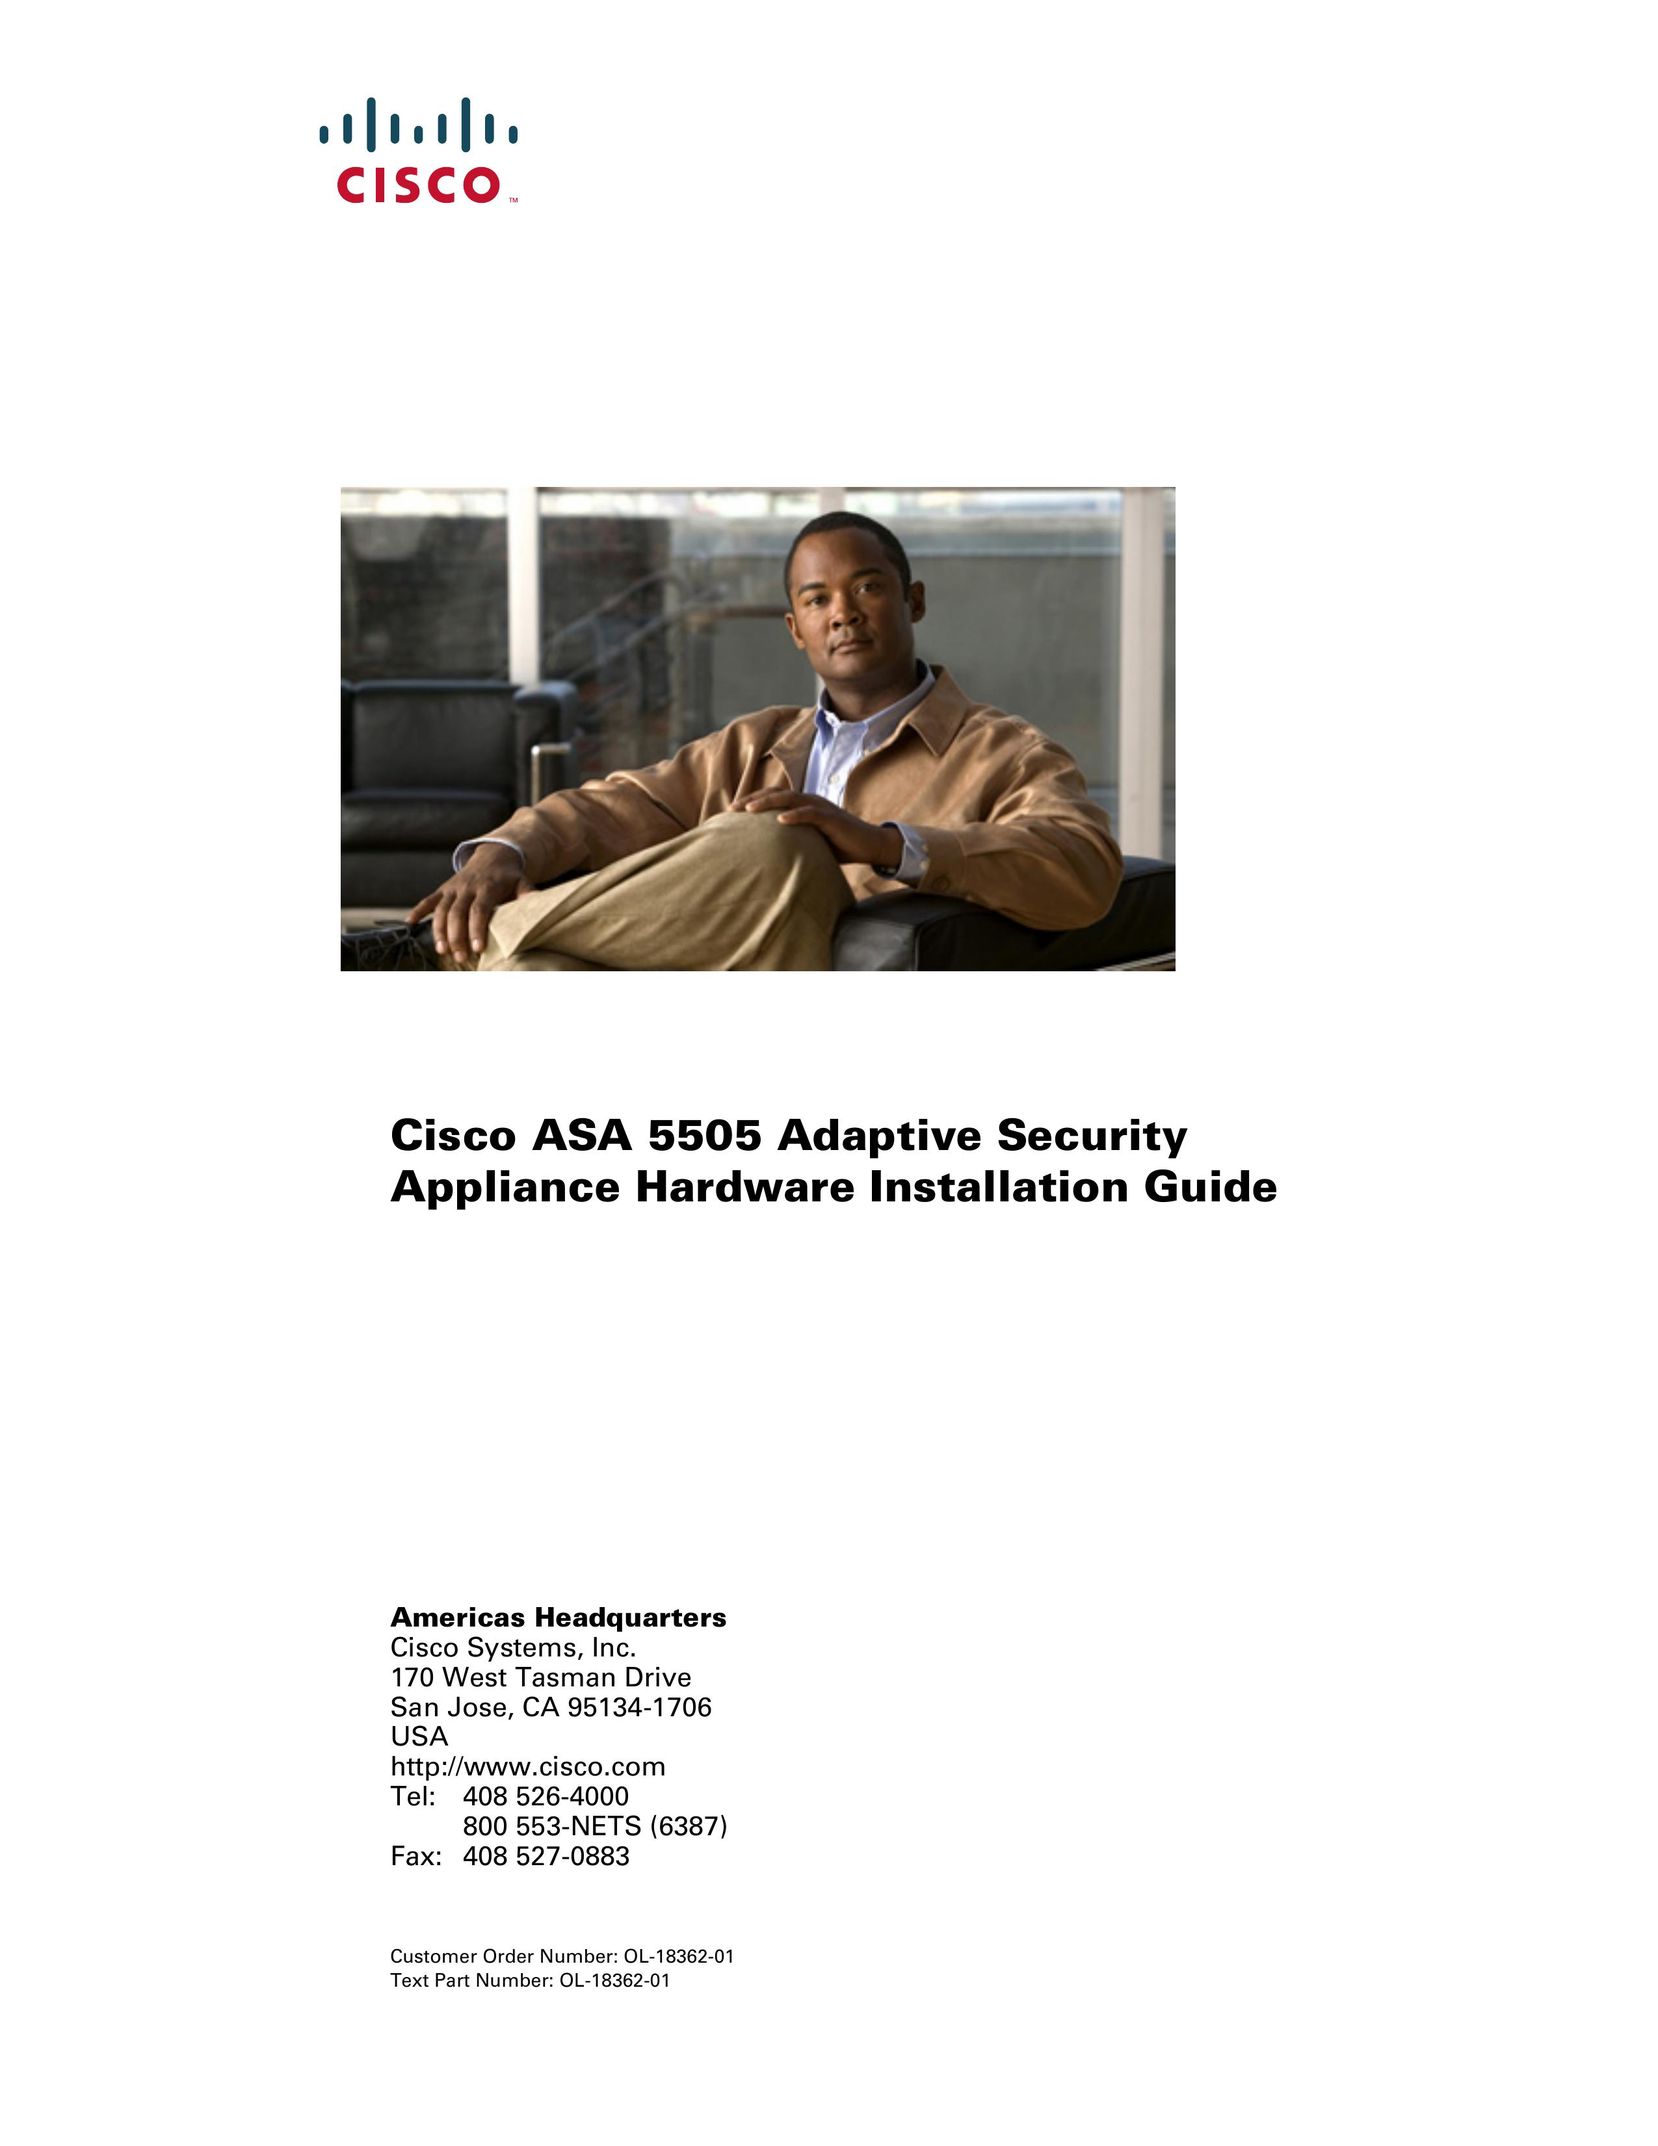 Cisco Systems ASA 5505 Home Security System User Manual